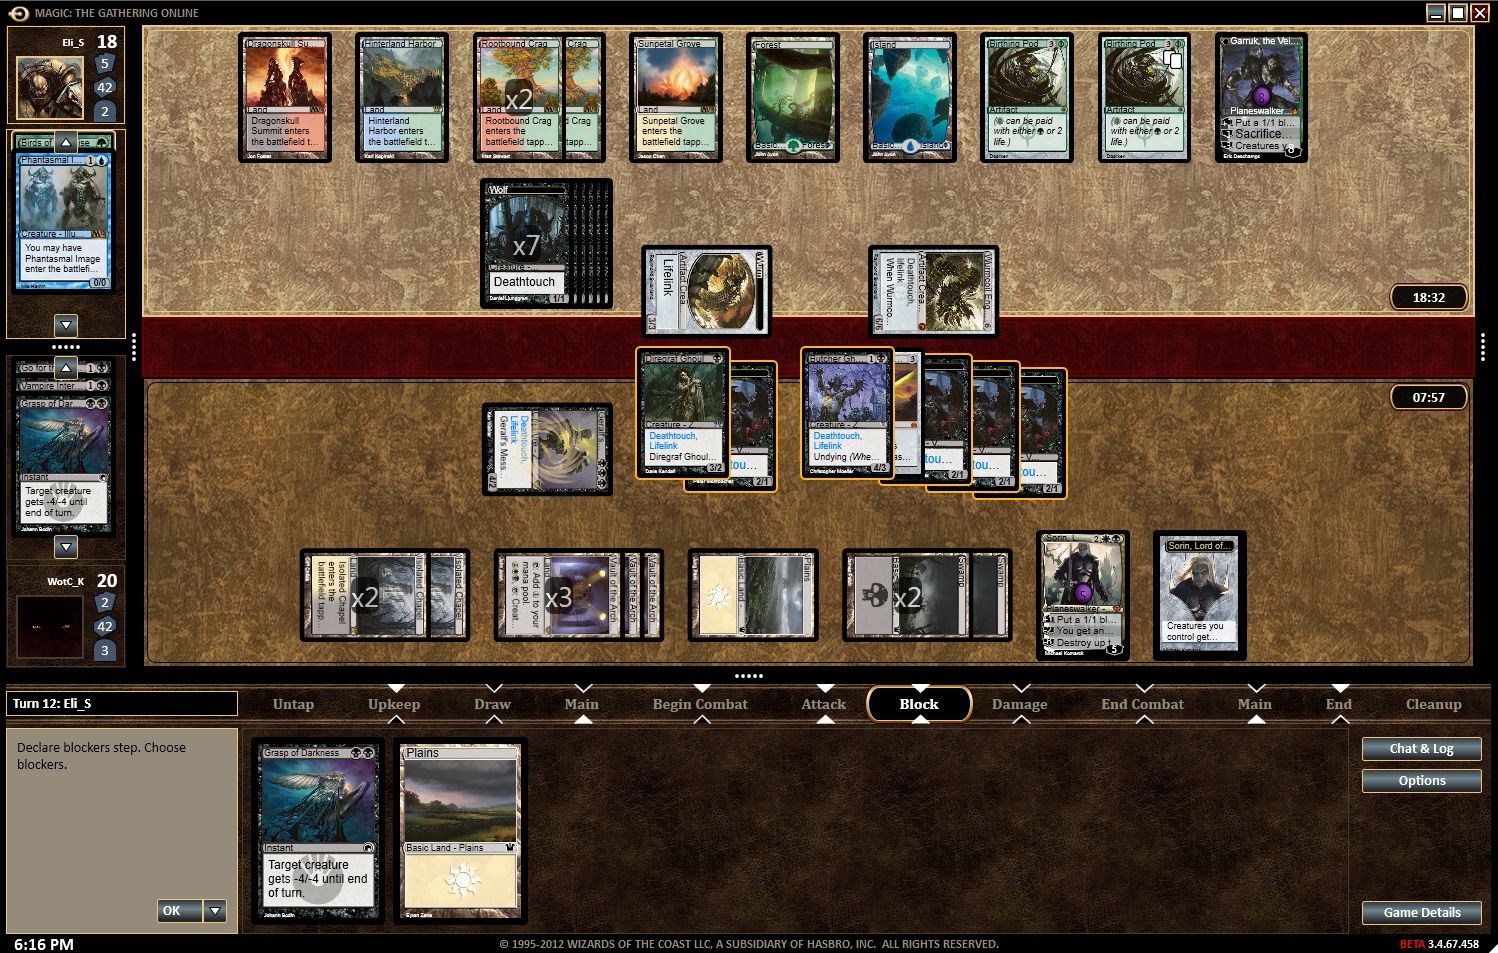 Game play screenshot of Magic: The Gathering Online client